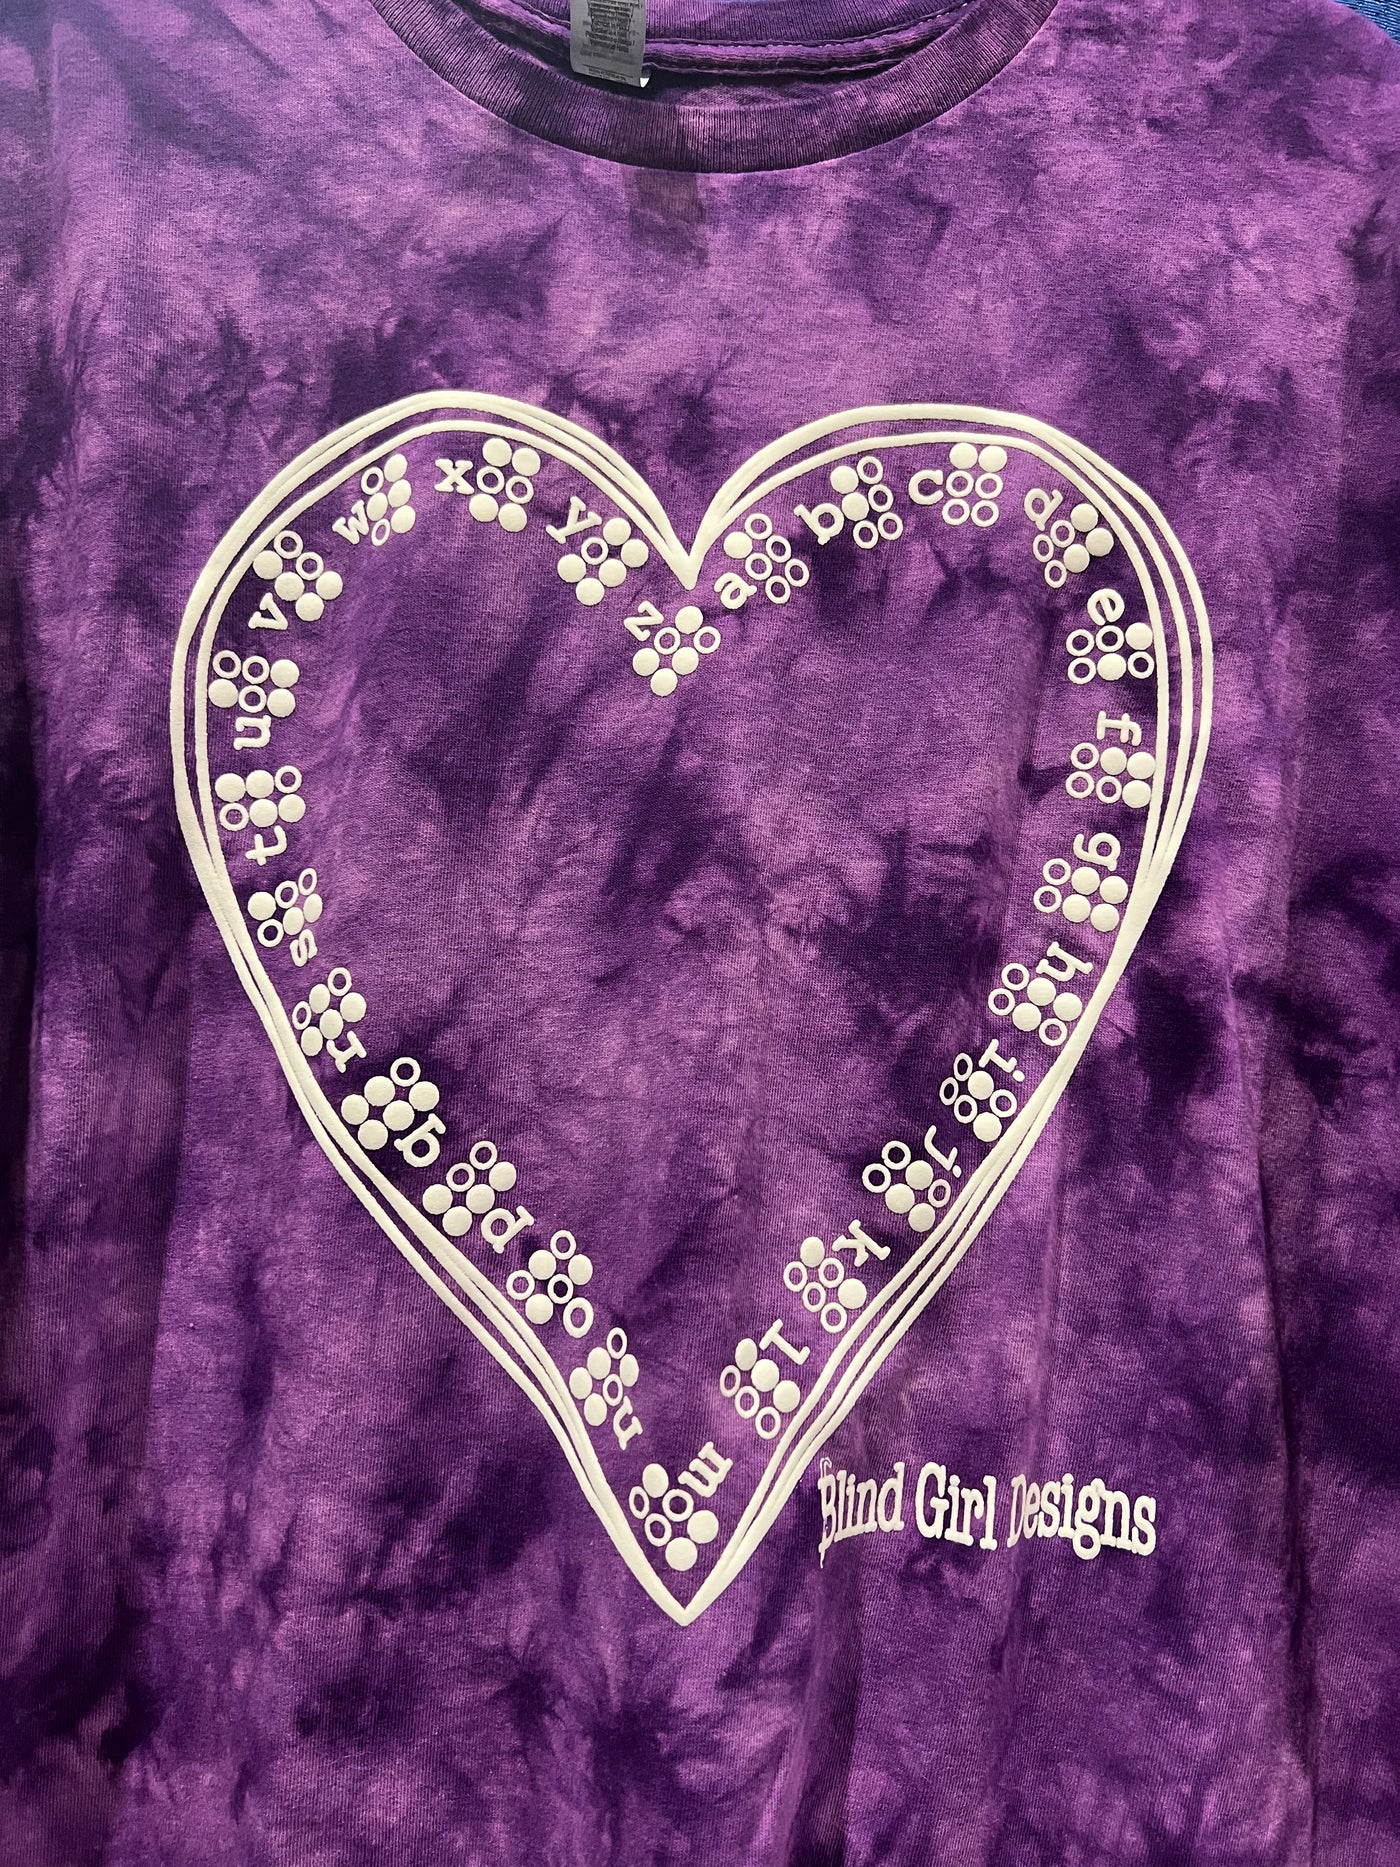 Braille Hearts T-Shirt - Dark and Light Purple Tie-Dyed